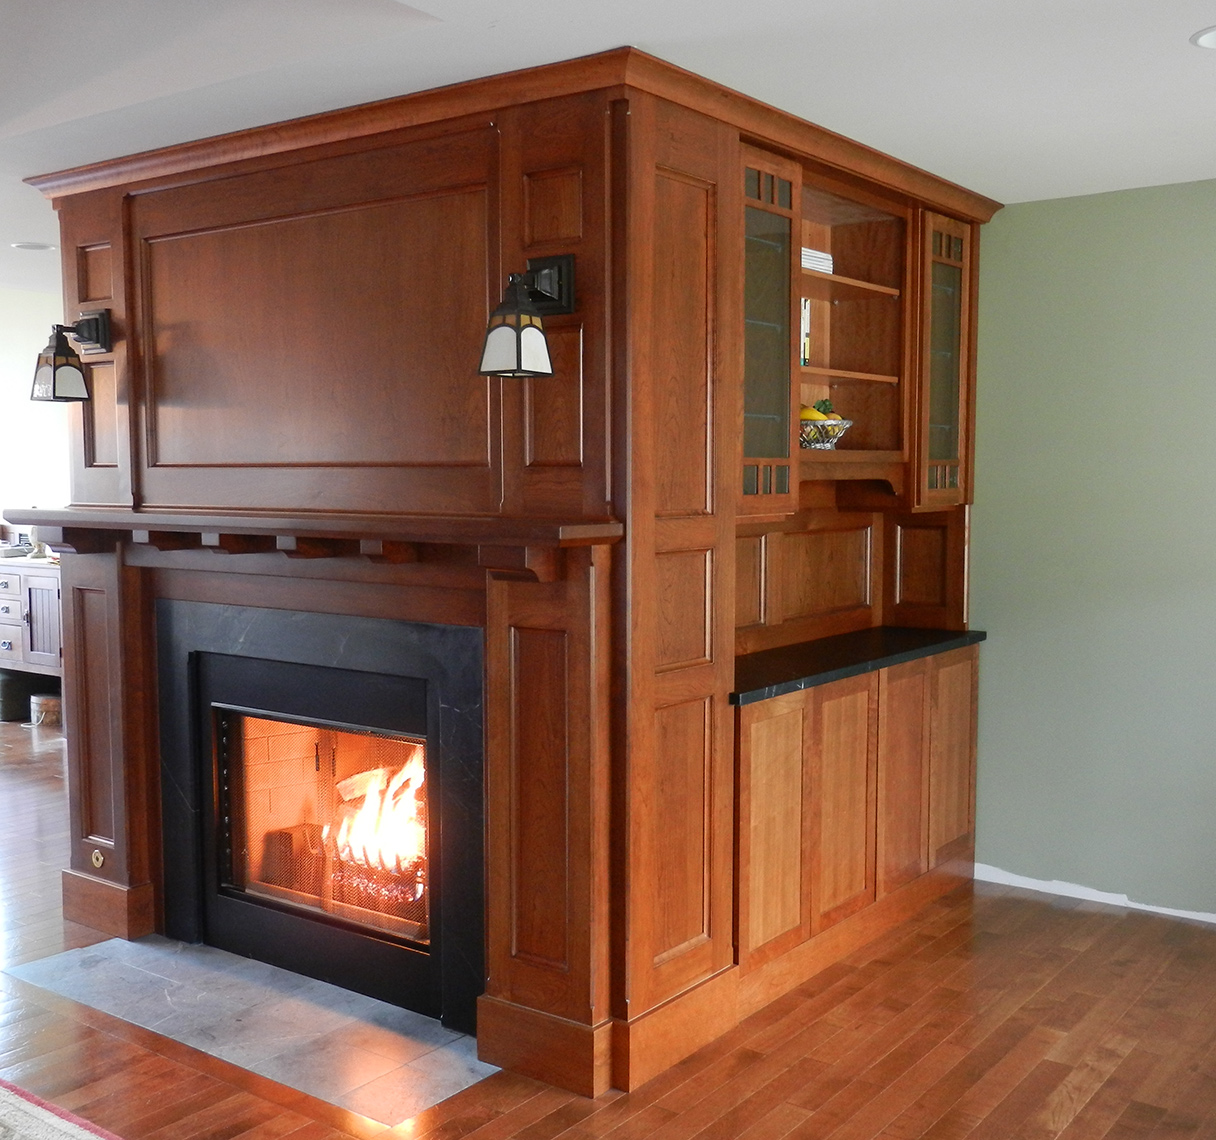 Custom-Woodworking-Mission-Style-Cherry-Fireplace surround